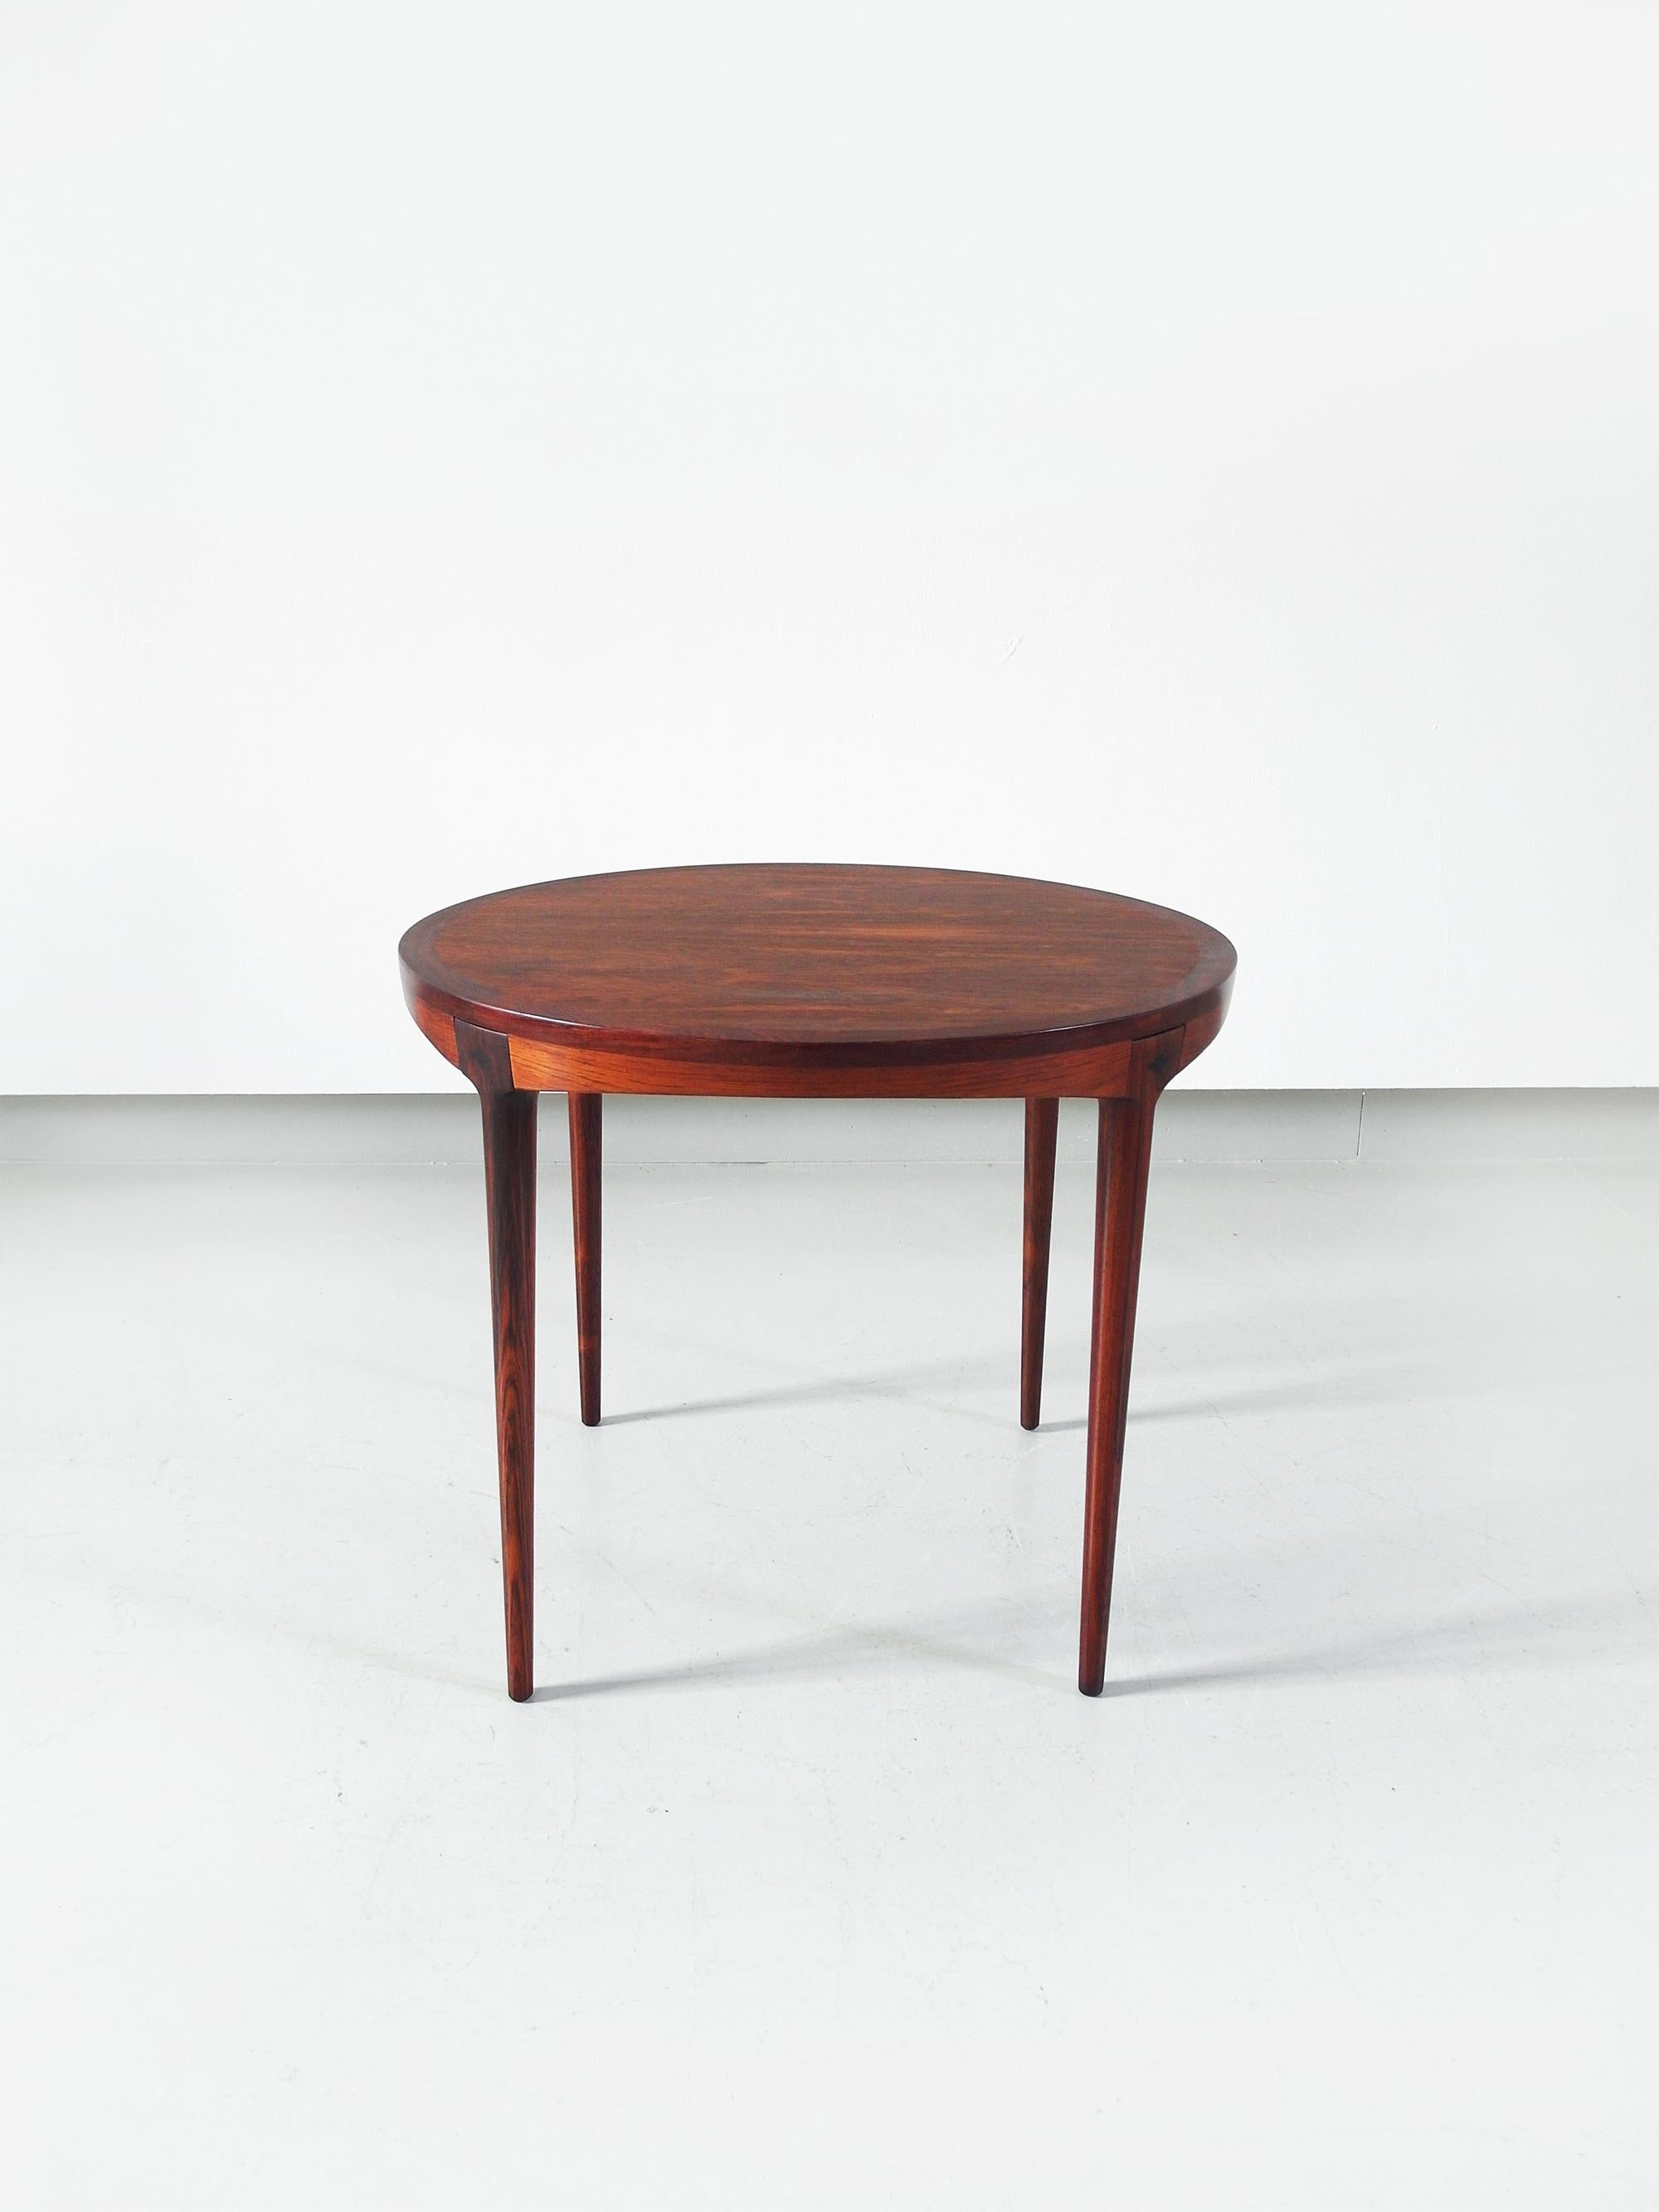 Beautiful rosewood side table by Haug Snekkeri, Bruksbo Norway, 1960s.
Circular rosewood top with beautiful distinctive grain on tall tapered legs. Skillfully crafted and finished with refined details. 
Dim. Diameter 59 CM x H 50 CM
The table is in